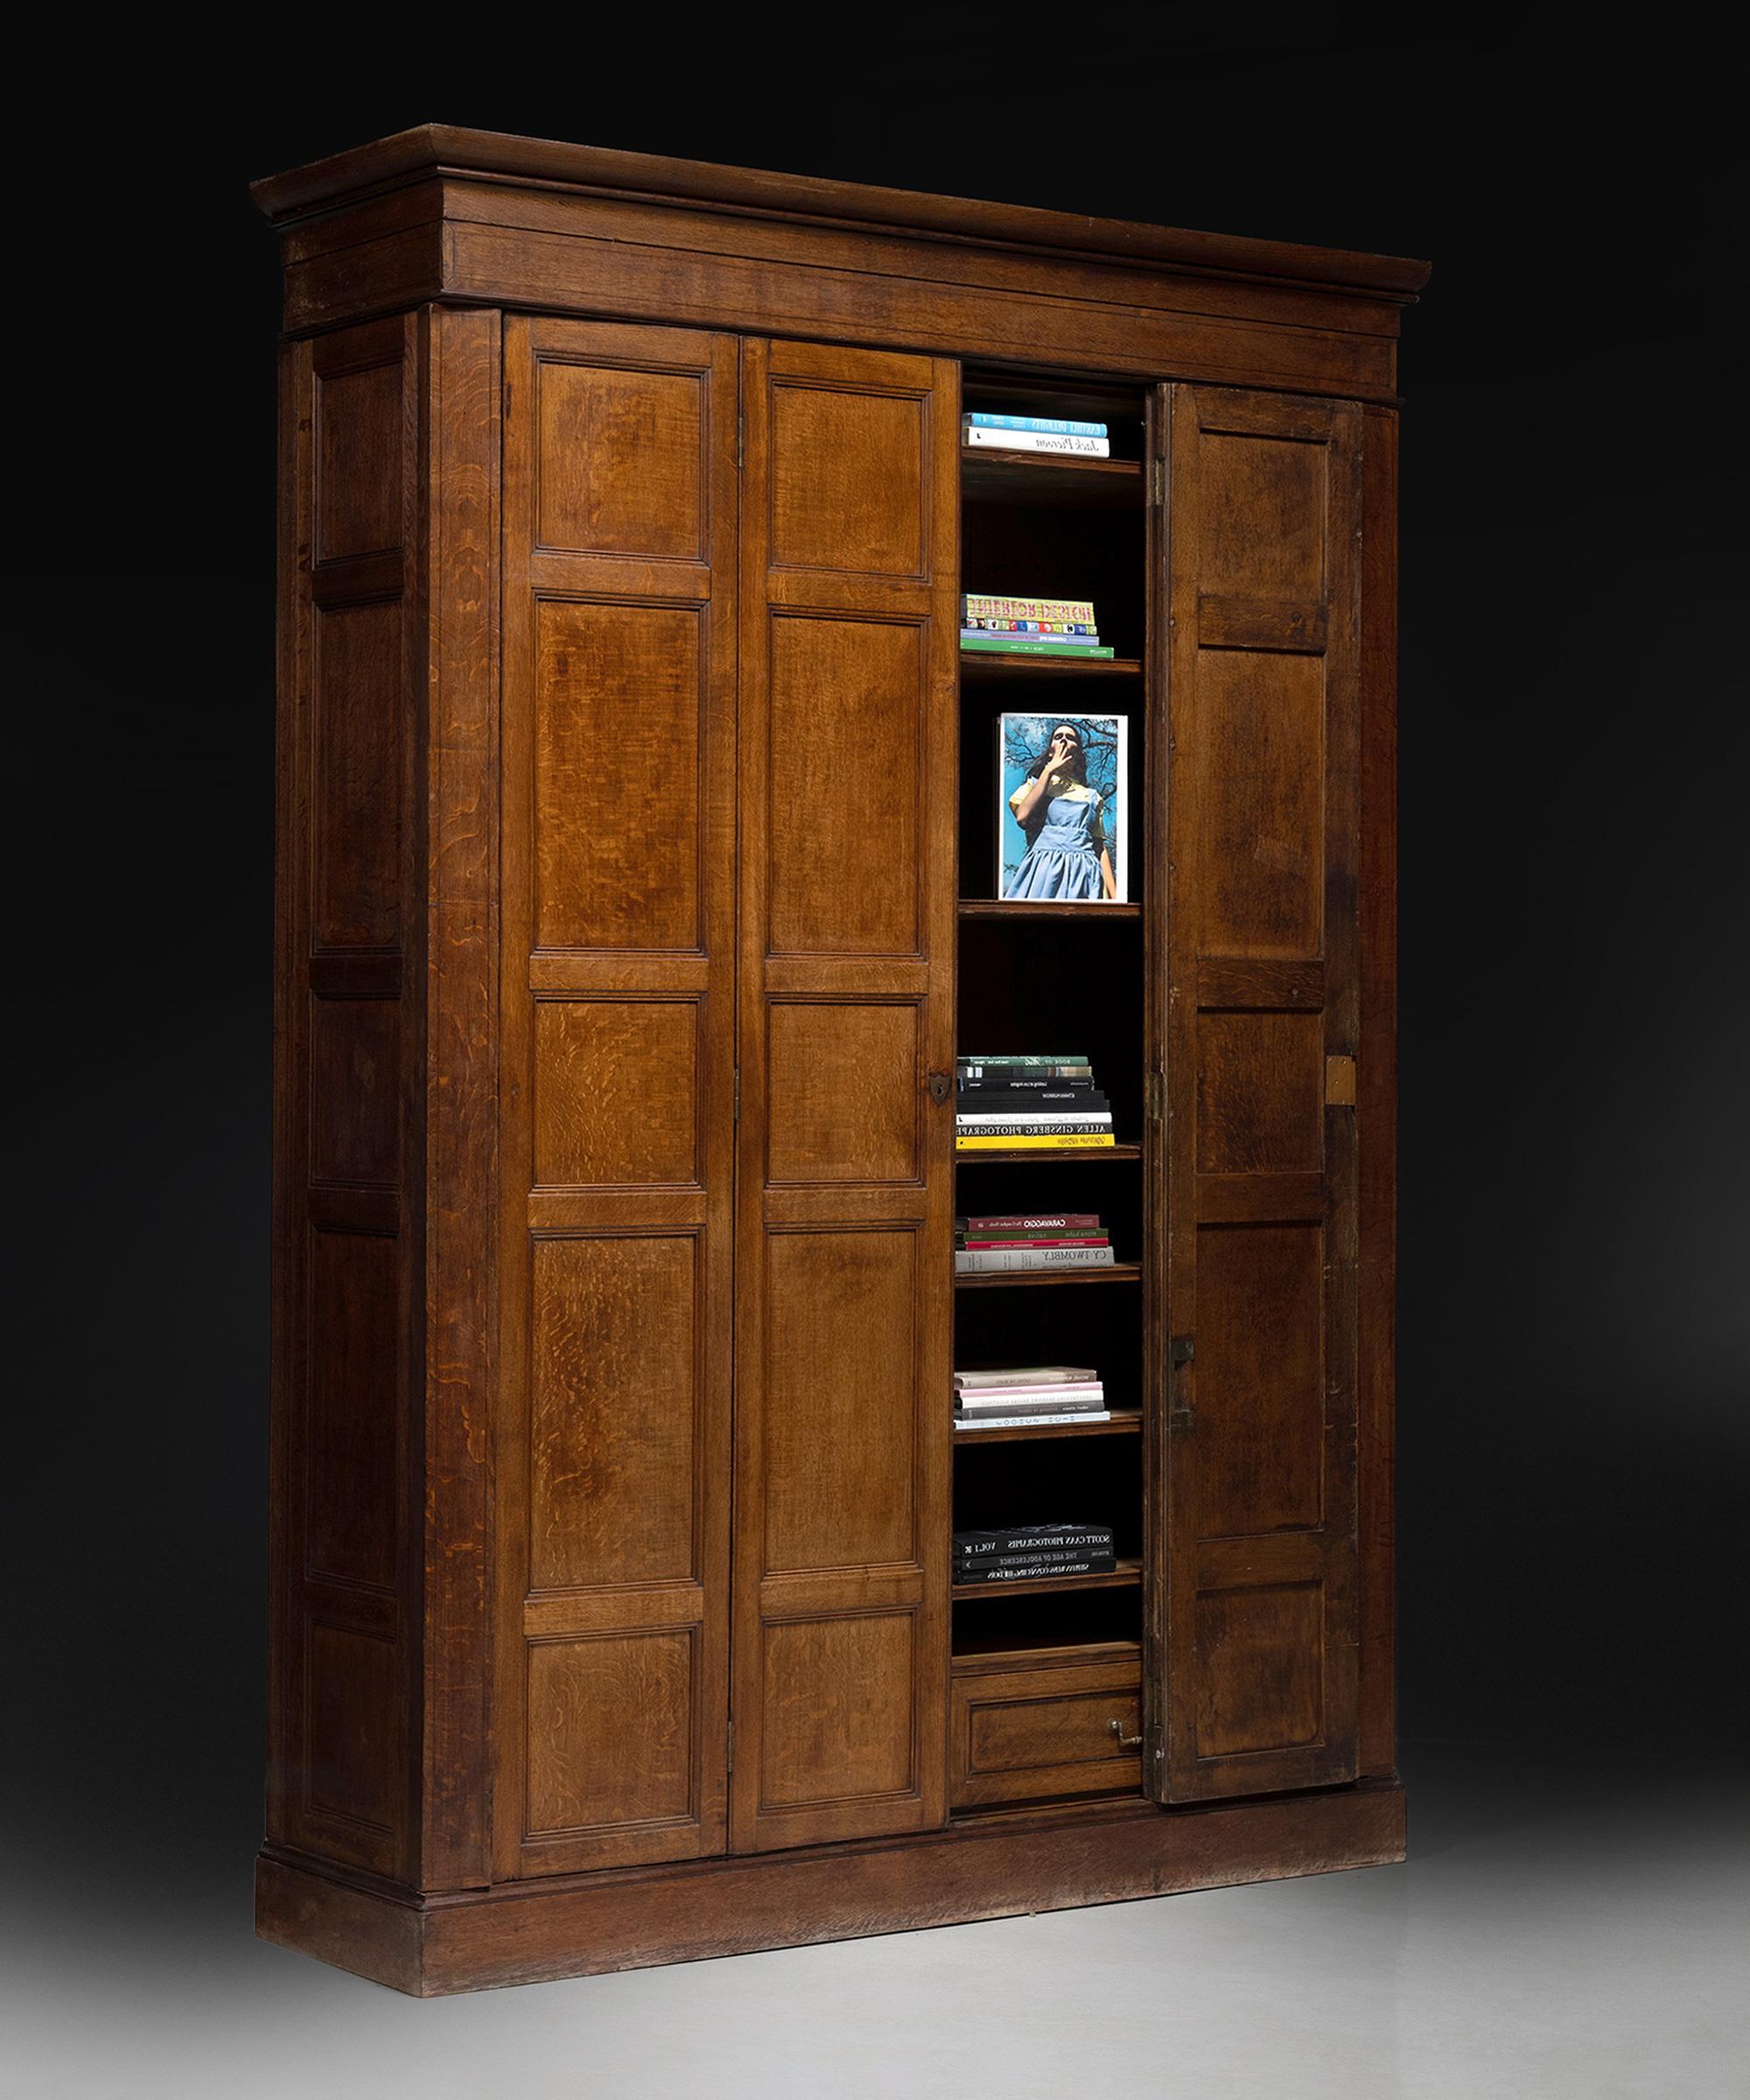 Oak Estate cabinet

Italy, circa 1810

Originally from an Italian Estate. Constructed in oak by an English Cabinet maker. The bifold doors have the ability to fold away, turning the cabinet into an open shelving unit.

Measures: 83”L x 24.5”D